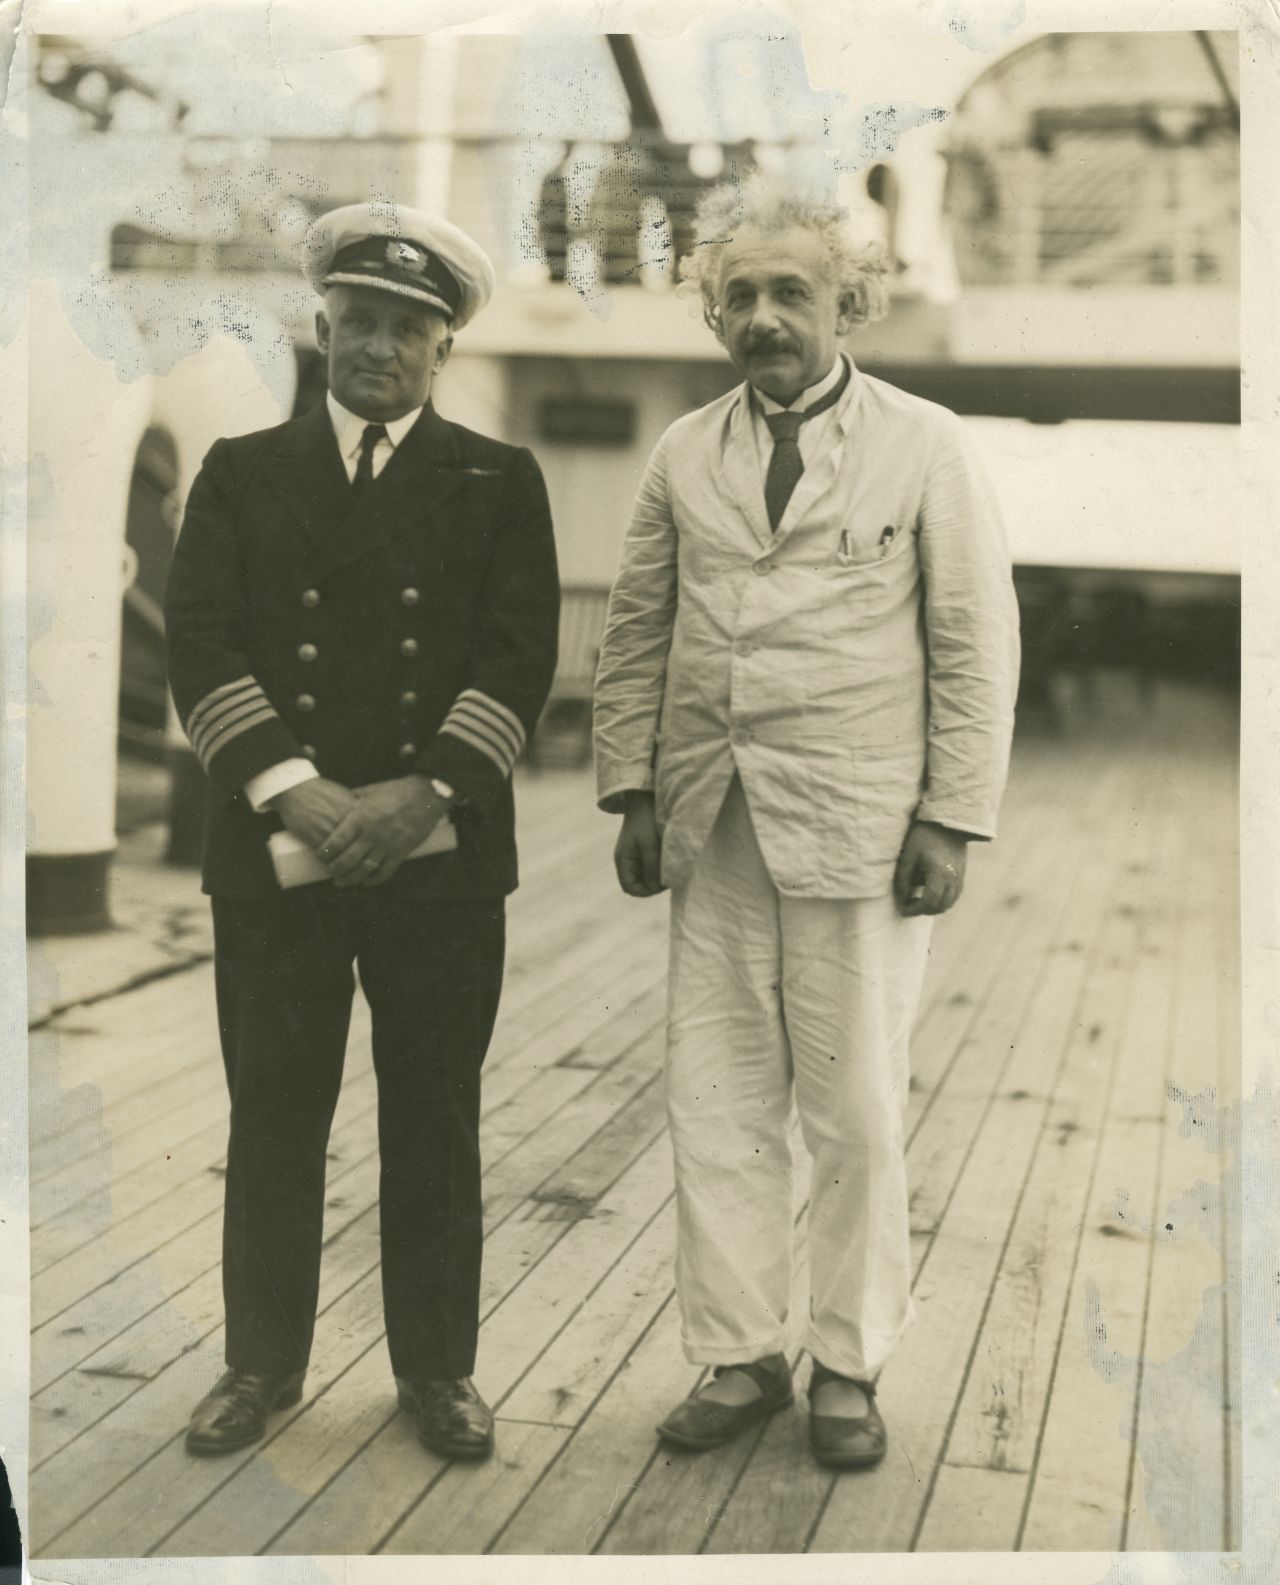 Albert Einstein poses on the deck of the SS Belgenland, 1930. He was one of 2.5 million passengers who sailed between Europe and North America with the Red Star Line shipping company from 1873 to 1934. He resigned from the Prussian Academy of Sciences on the ship's stationary -- the letter now appears in the new $25 million Red Star Line Museum in Belgium.